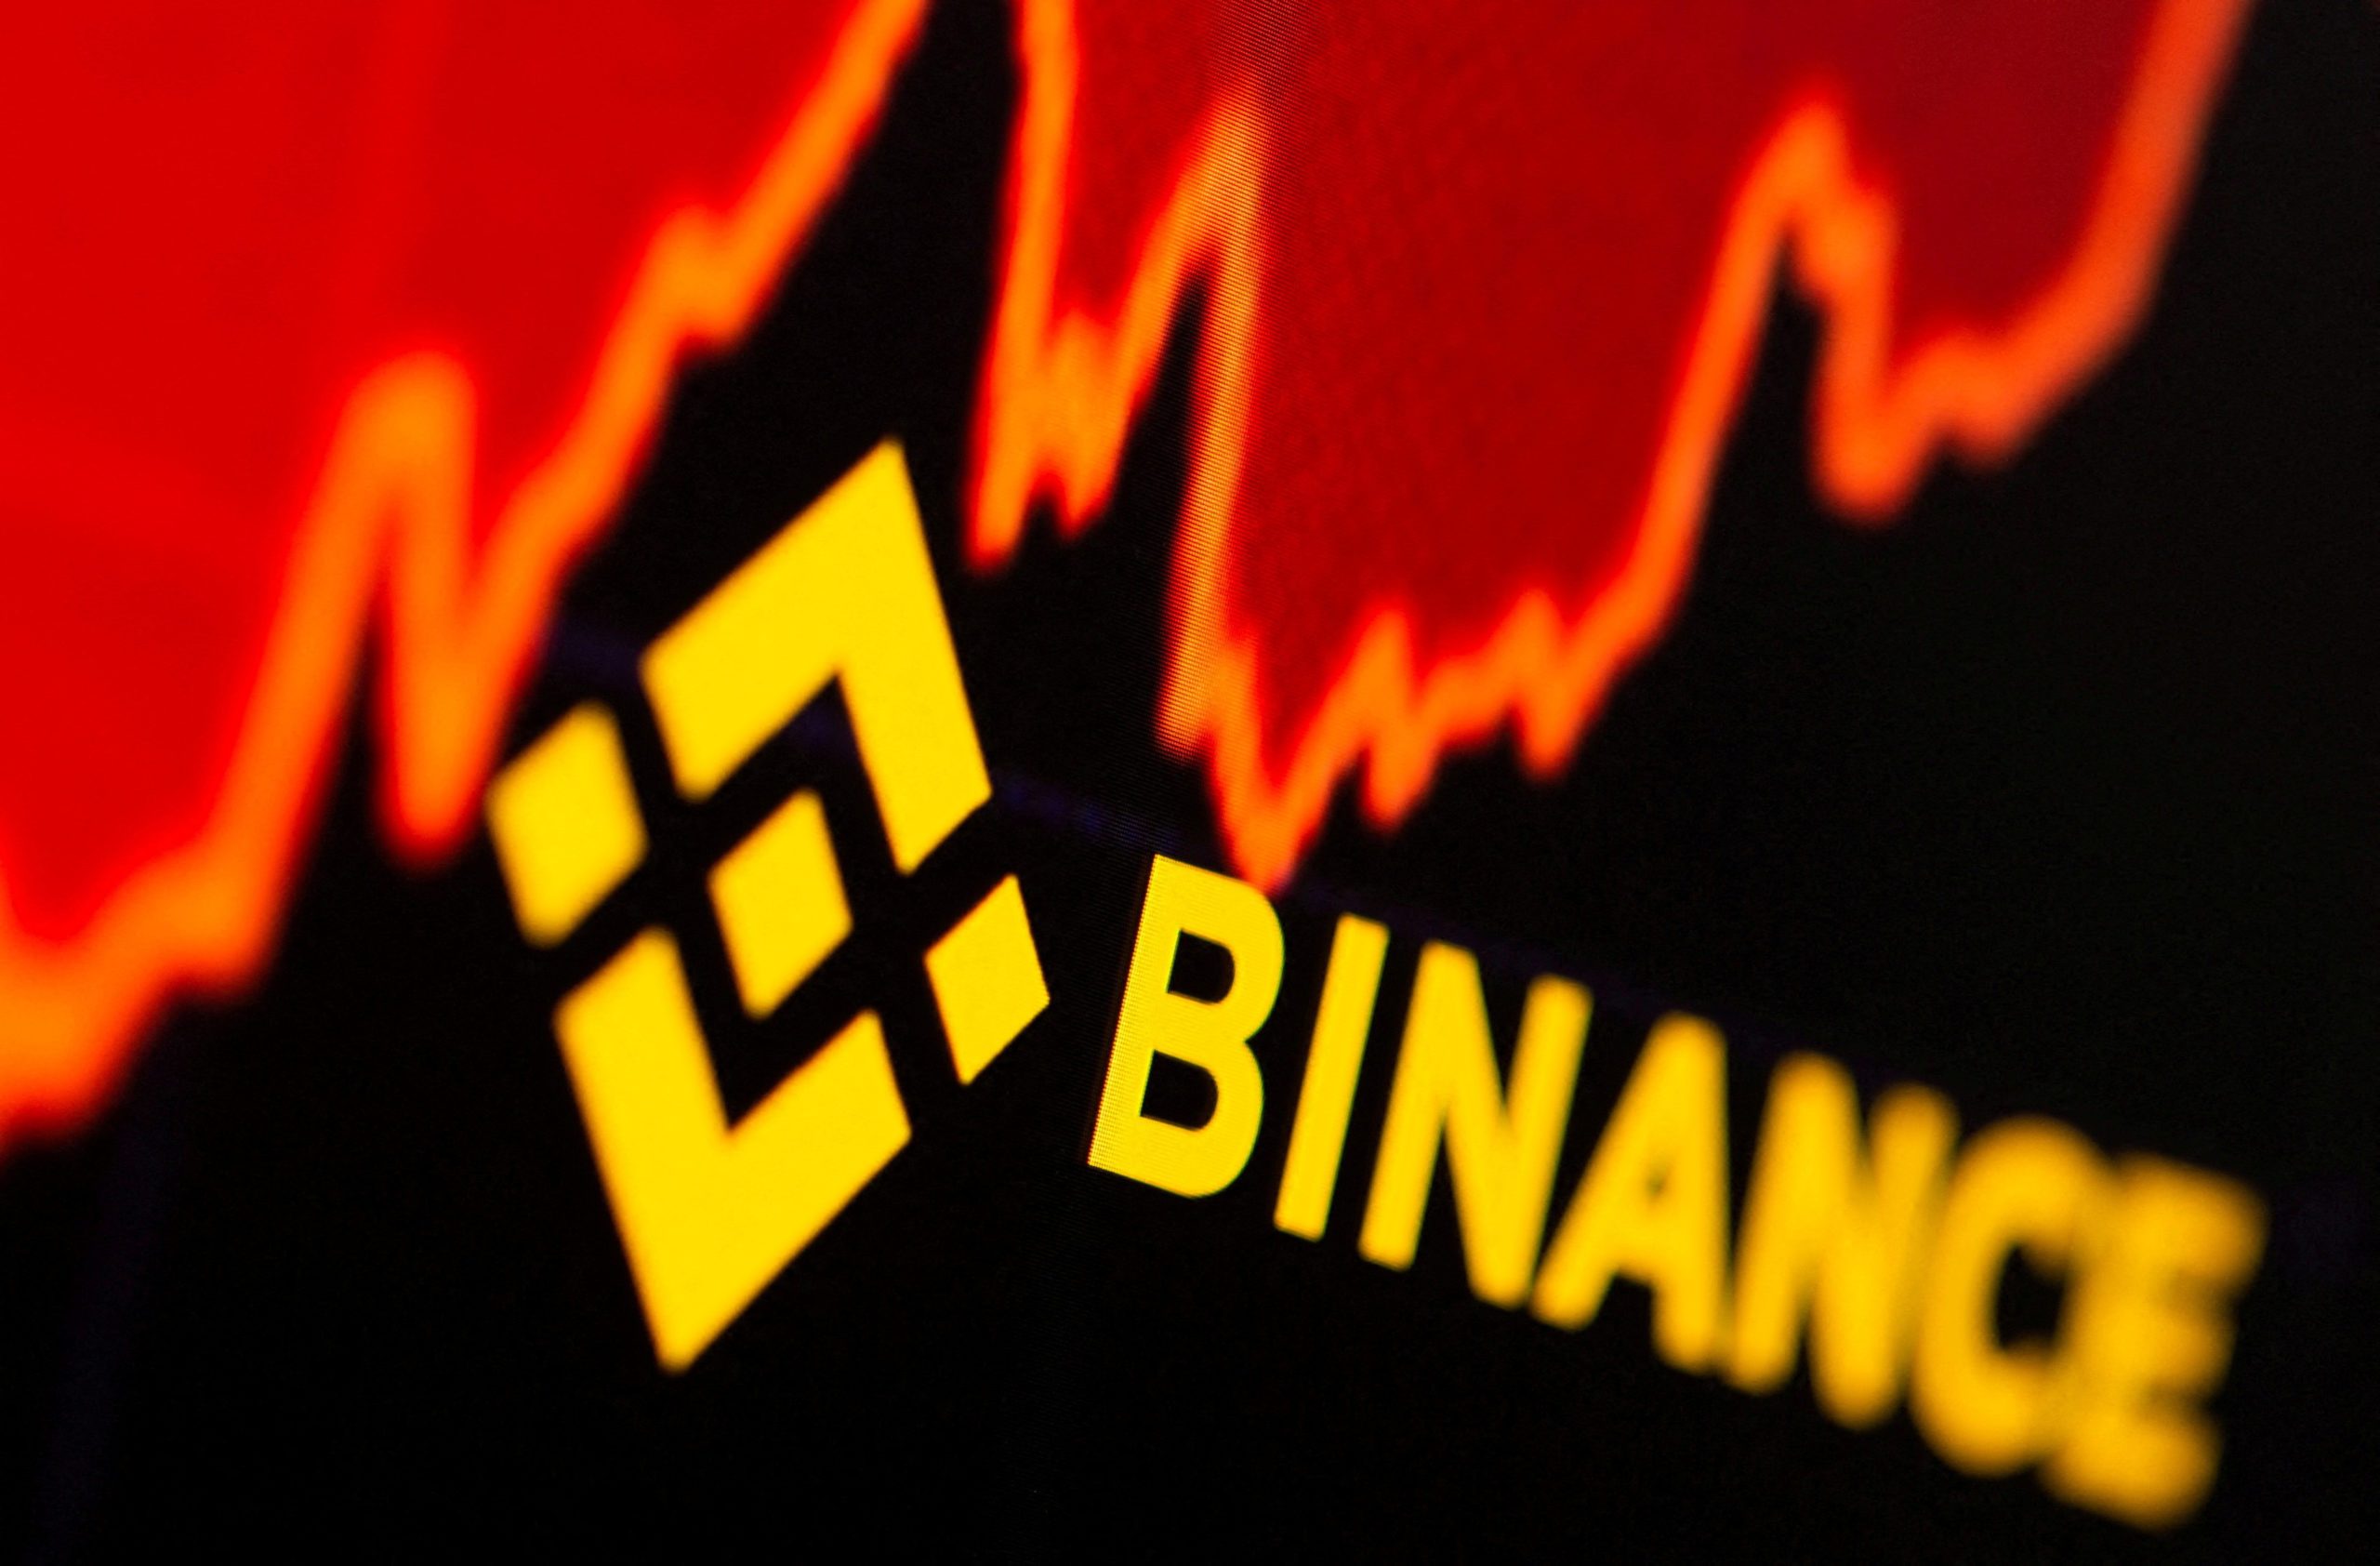 Binance's US partner confirms CEO Zhao's firm operated on exchange